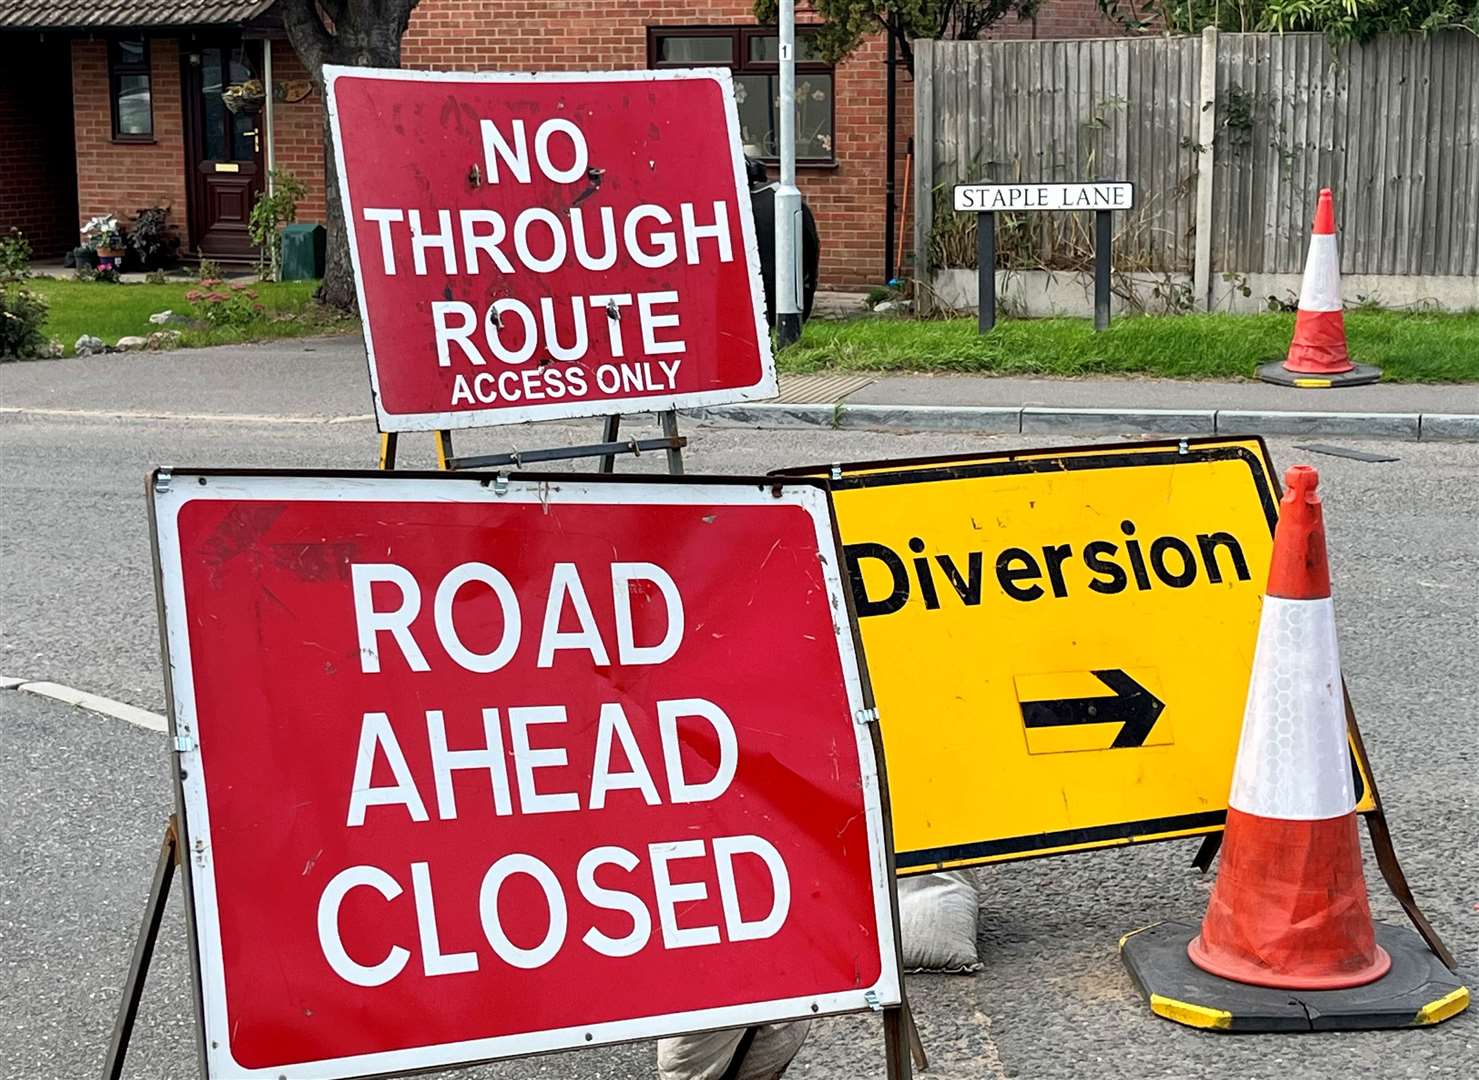 Delays for roadworks are a constant bugbear for drivers